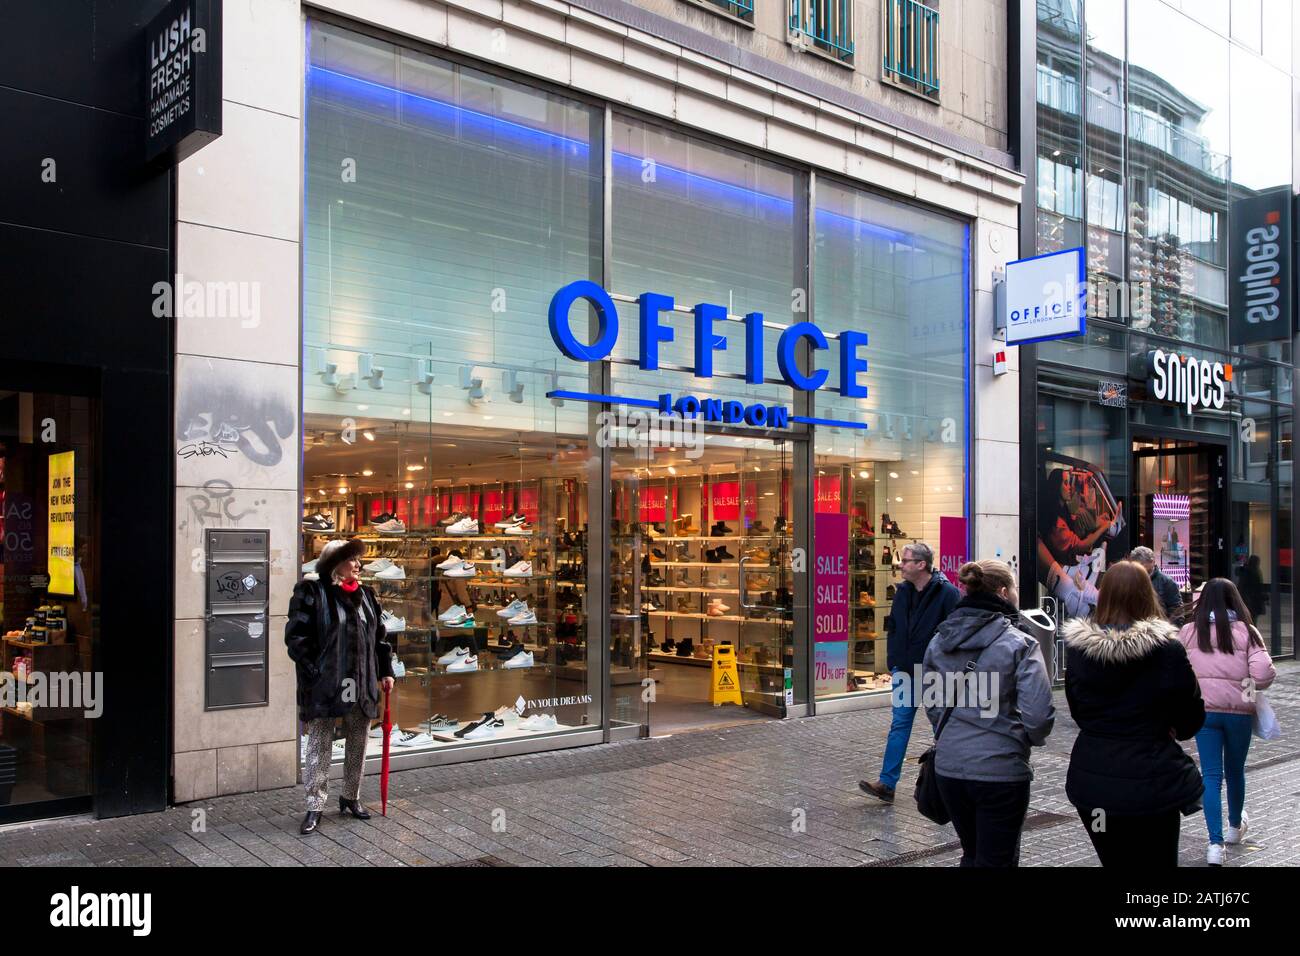 Europe, Germany, Cologne, Office London shoe store on the shopping street Hohe Strasse.  Europa, Deutschland, Koeln, Office London Schuhgeschaeft in d Stock Photo